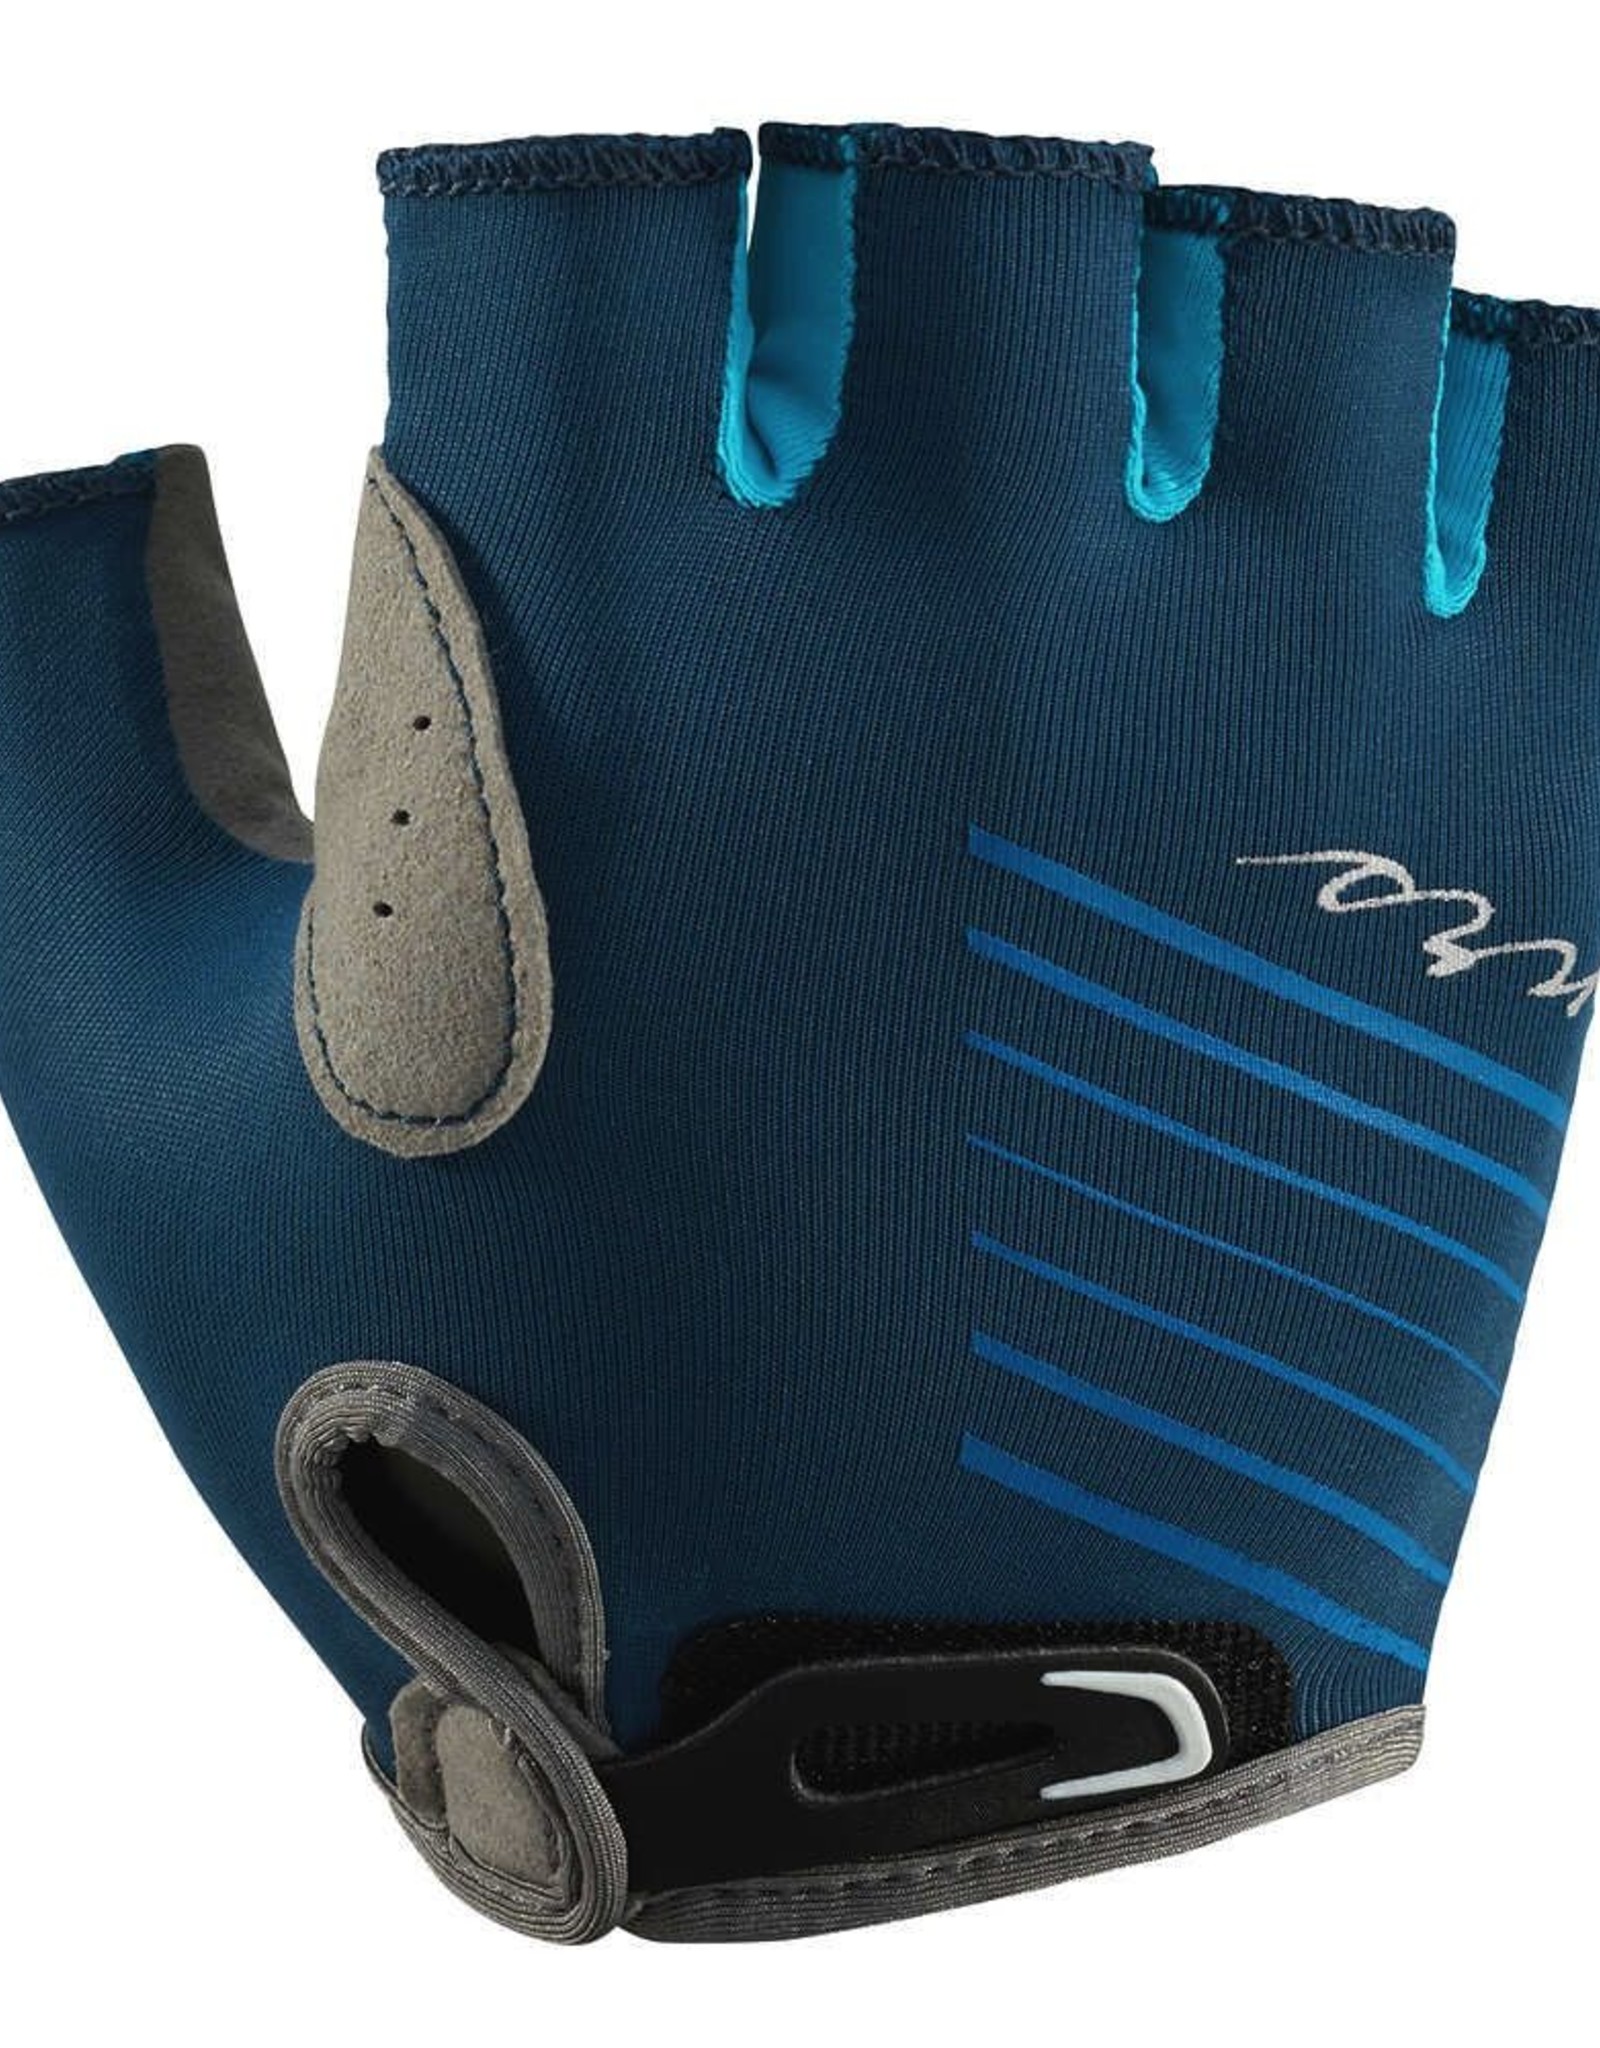 NRS NRS Boaters Glove, Womens, Moraccan Blue